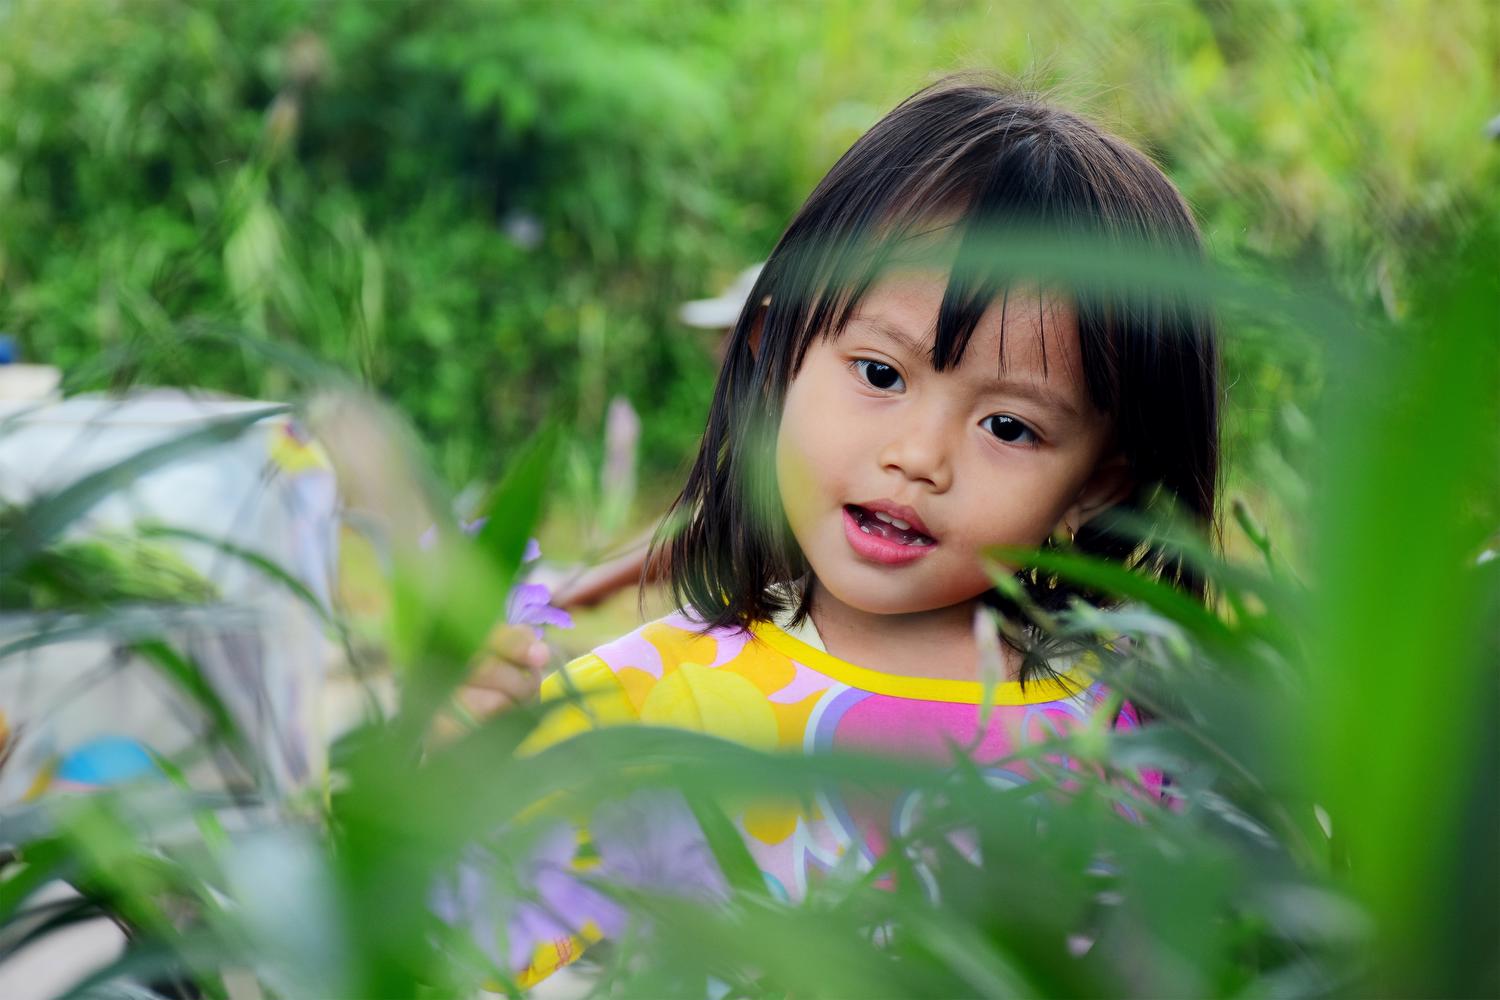 A young girl picks a flower in a wild setting.